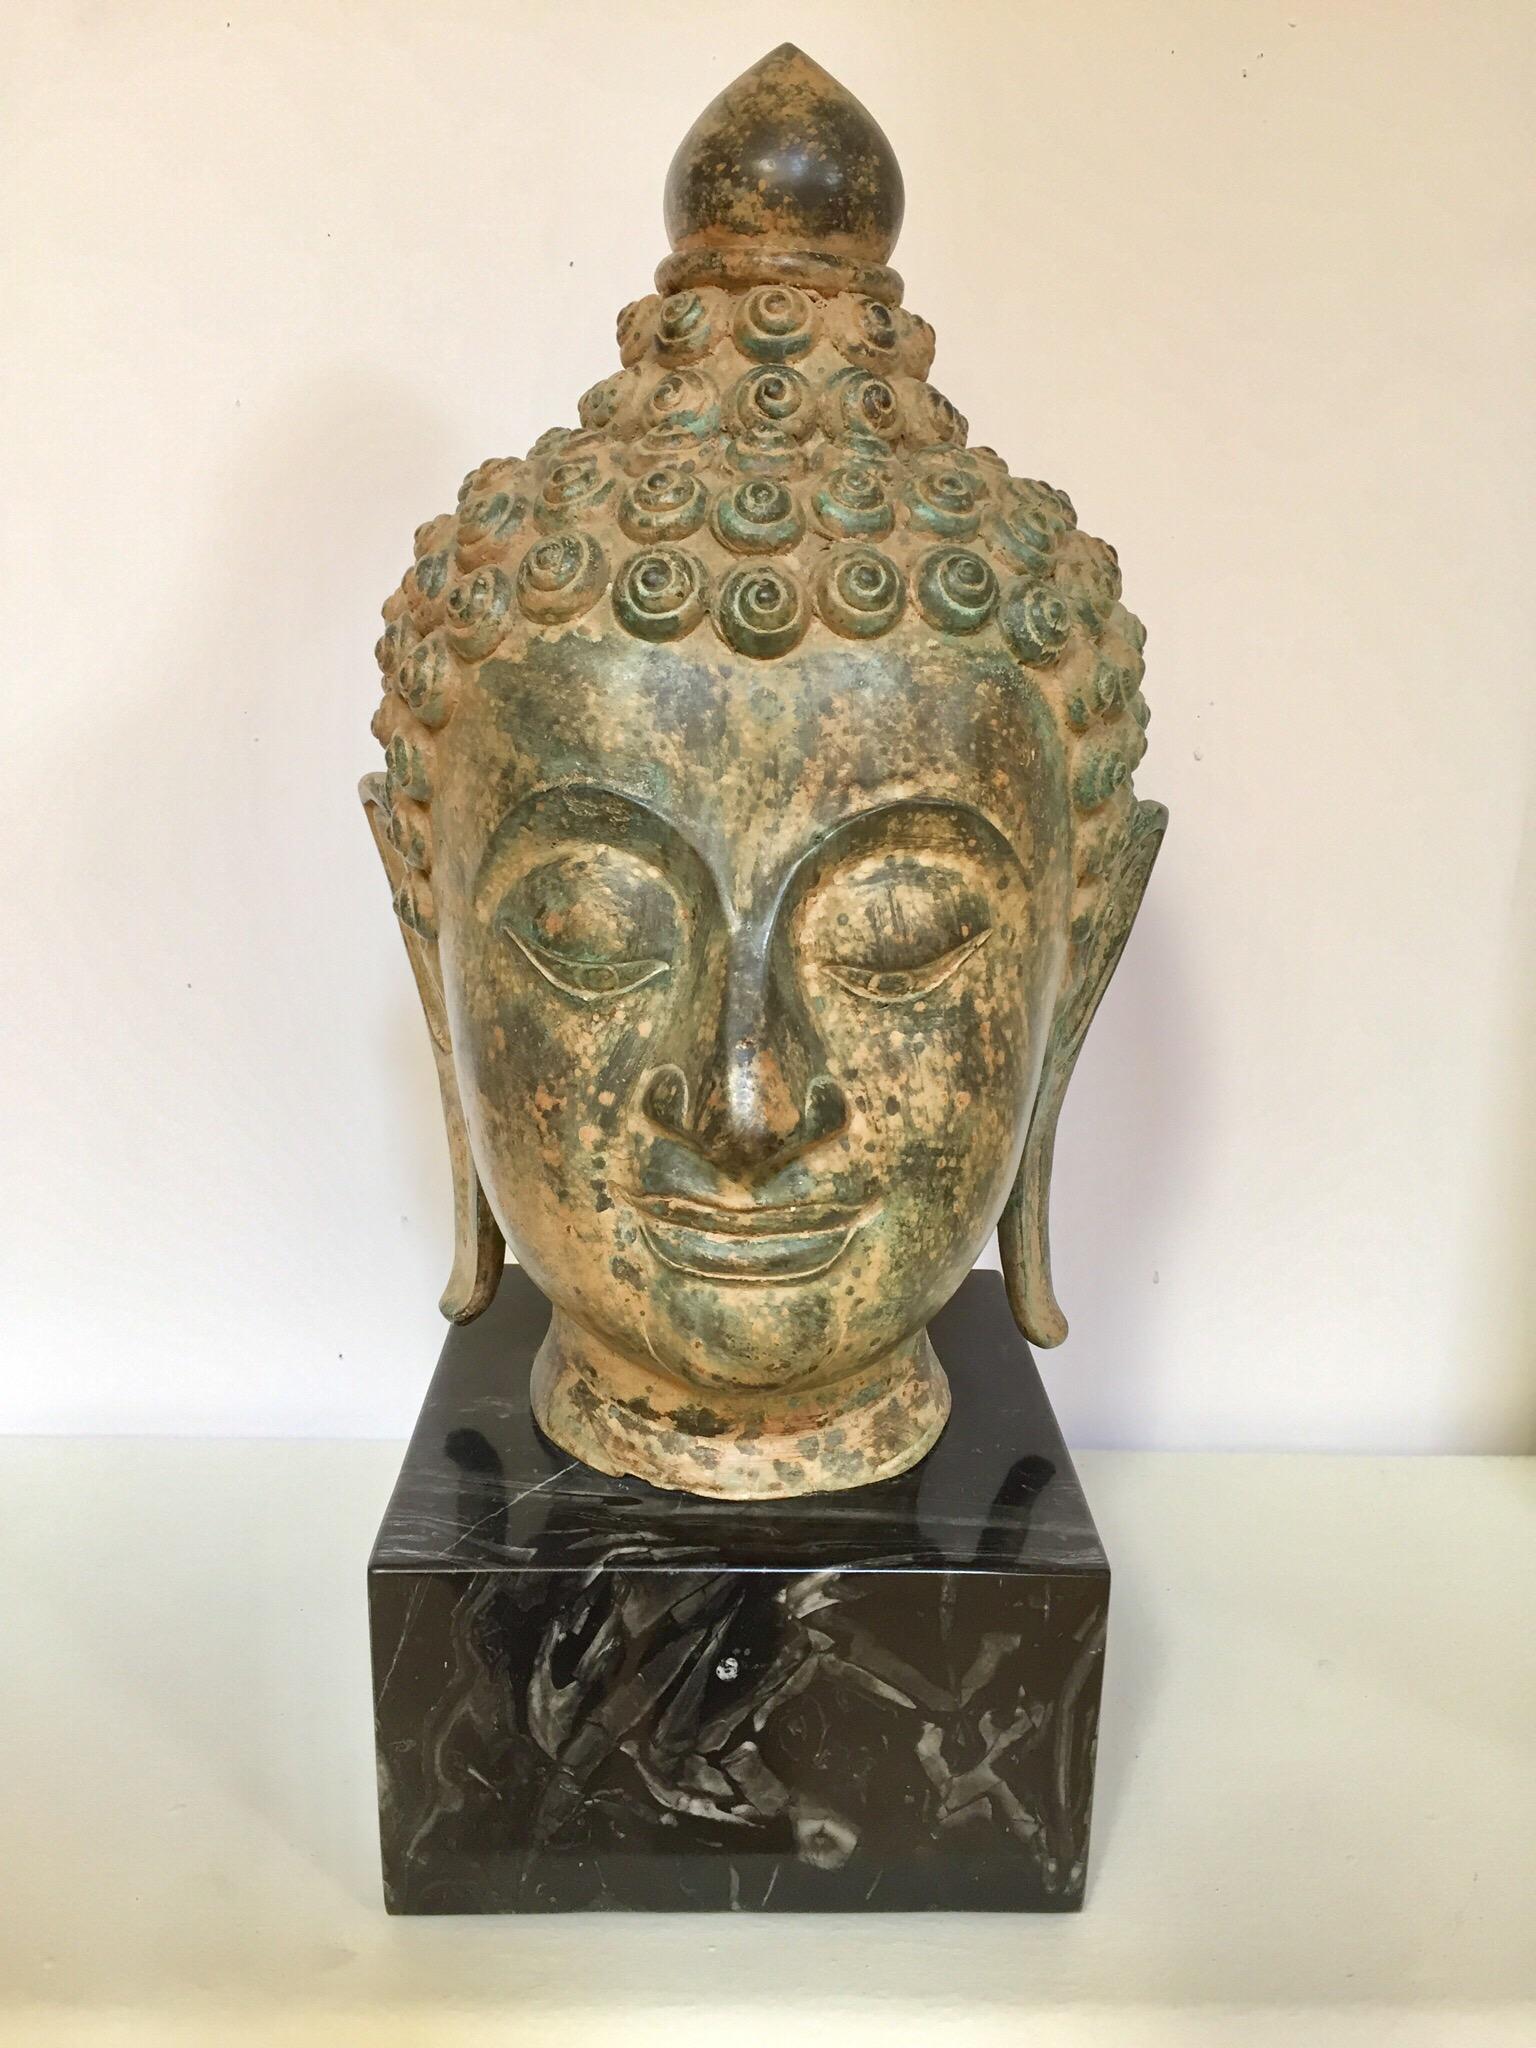 Life-size bronze Buddha head sculpture mounted on marble stand.
Buddha head with eyes lowered in meditation, serene and calm, representing the enlightened Buddha.
Finely modeled with incised chin, bow-shaped mouth, elongated eyes and gently